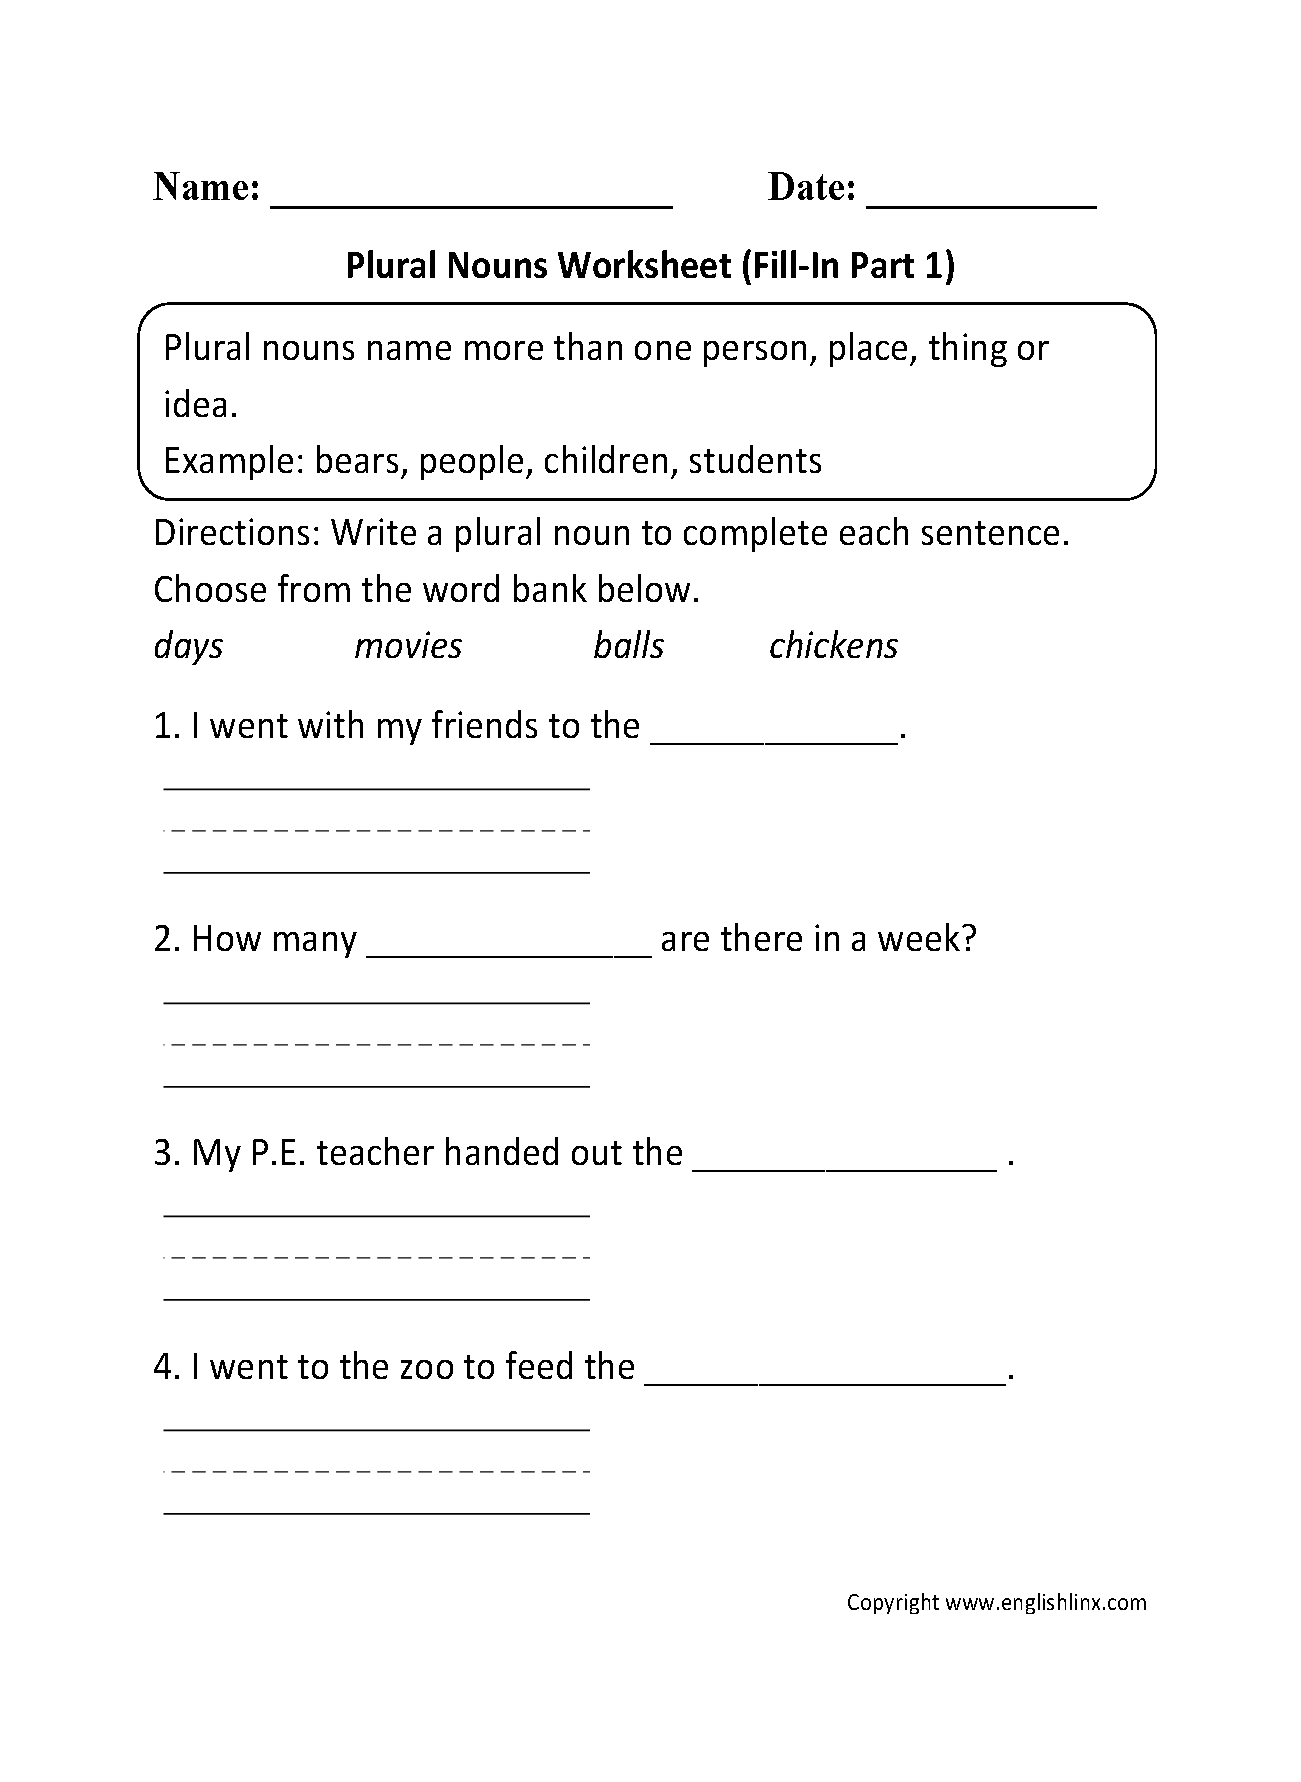 17-worksheets-adjectives-and-adverbs-sentence-worksheeto